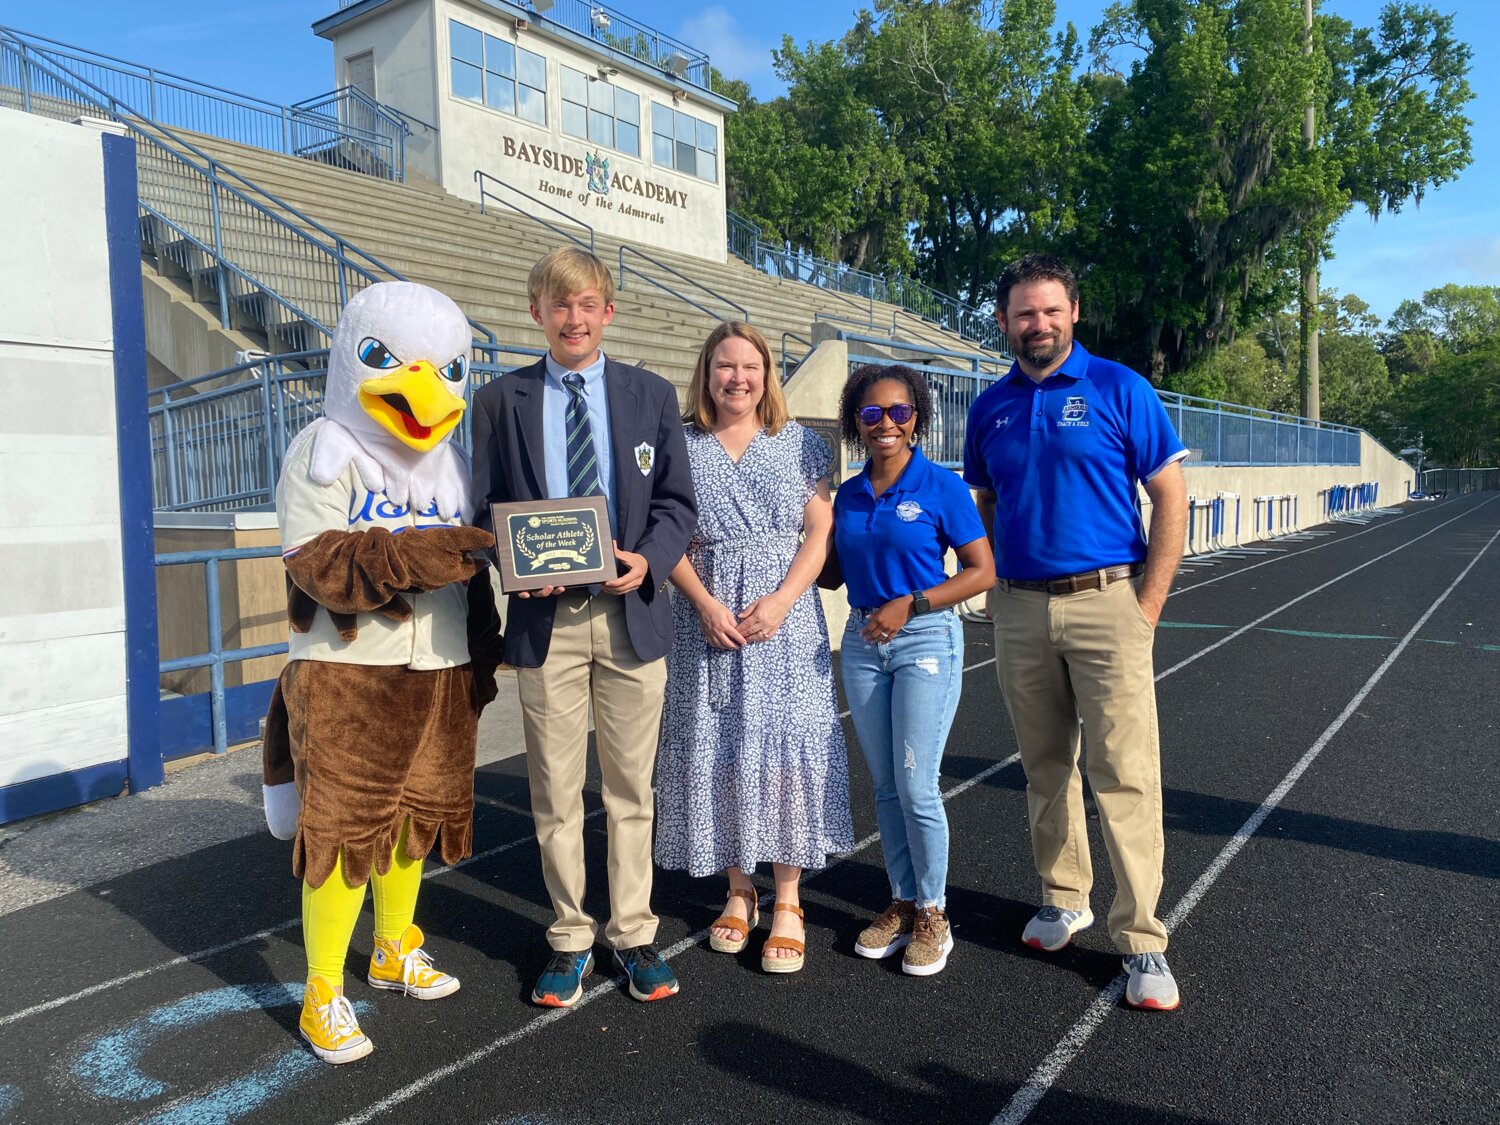 Sammy the Eagle from the United States Sports Academy was on hand at Bayside Academy Monday, April 17, to help recognize Ty Postle as a WKRG Scholar-Athlete. They are pictured with Melissa Postle, USSA’s Chair of Sports Exercise Science Dr. Katrina Wahlstrom and Admiral head track coach Joe Swagart.